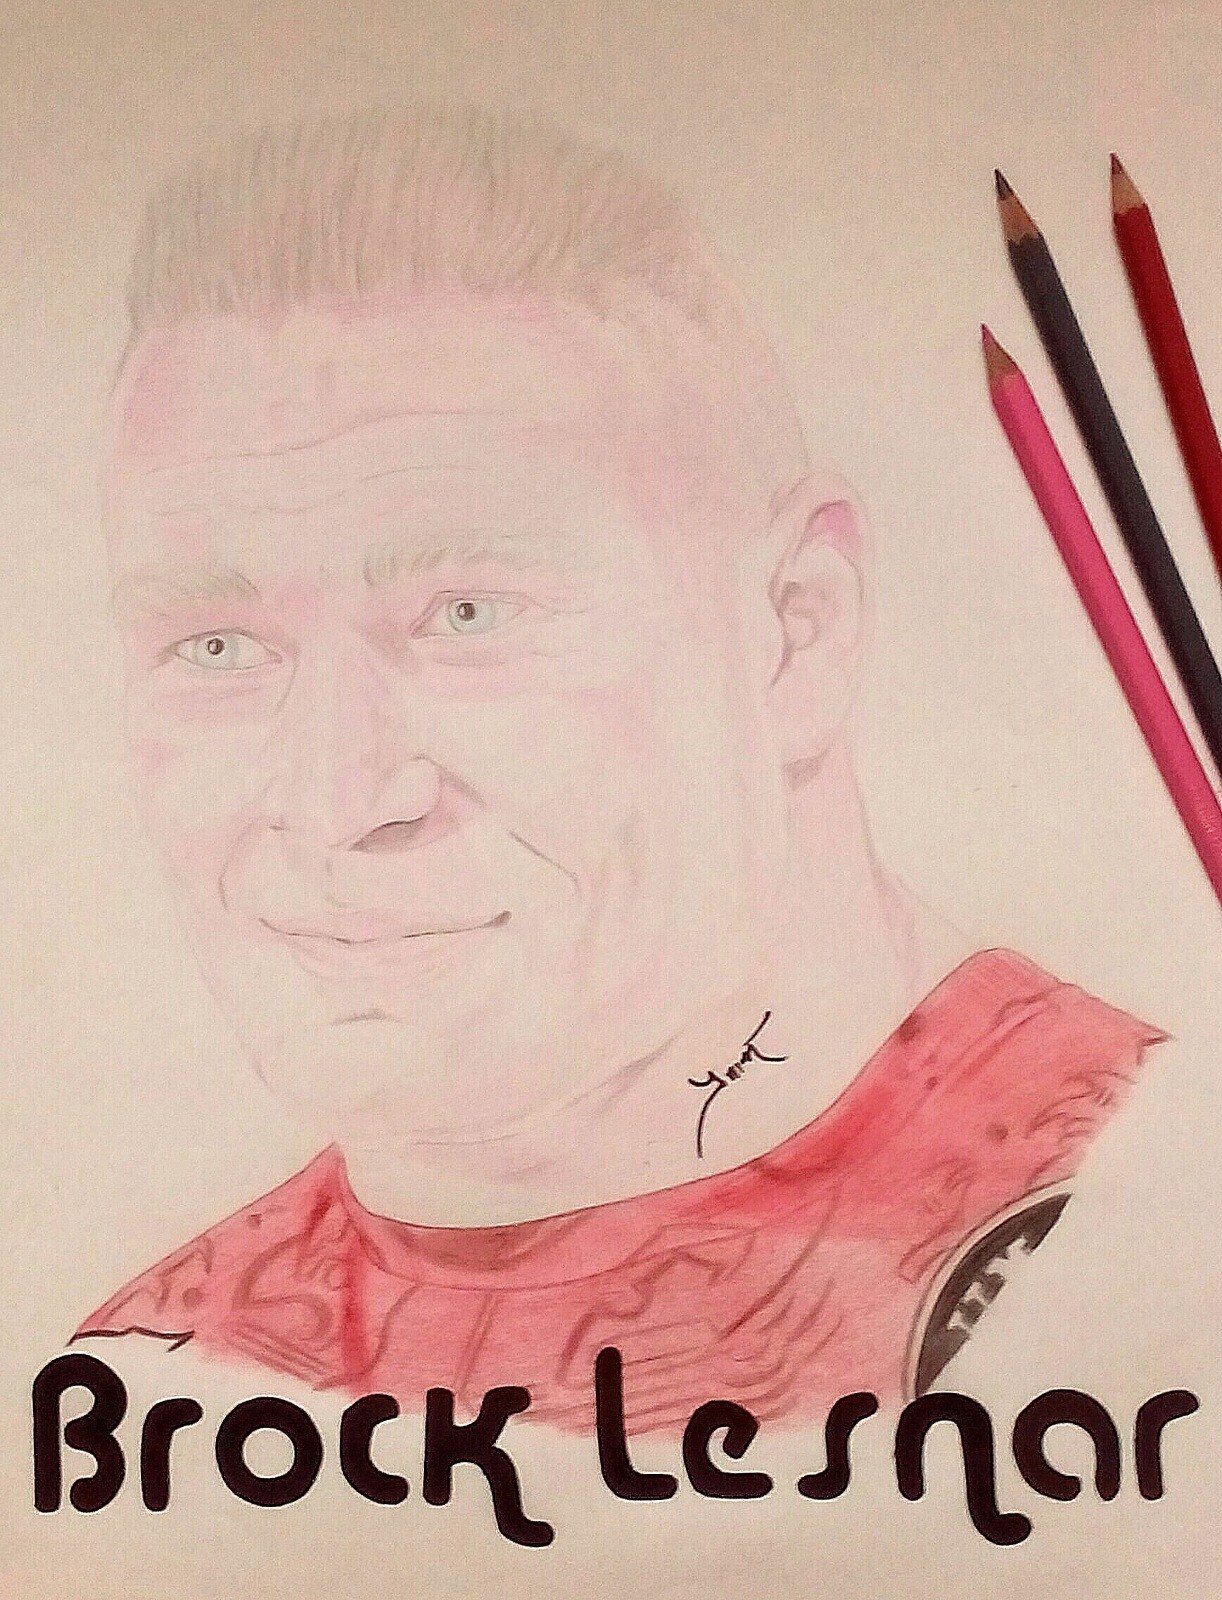 Amit Sharma on Twitter Sketch by me I hope you see it amp respond Big  fan of yours BrockLesnar HeymanHustle WWEIndia WWE  httpstcoqUBEeYQUy8  Twitter